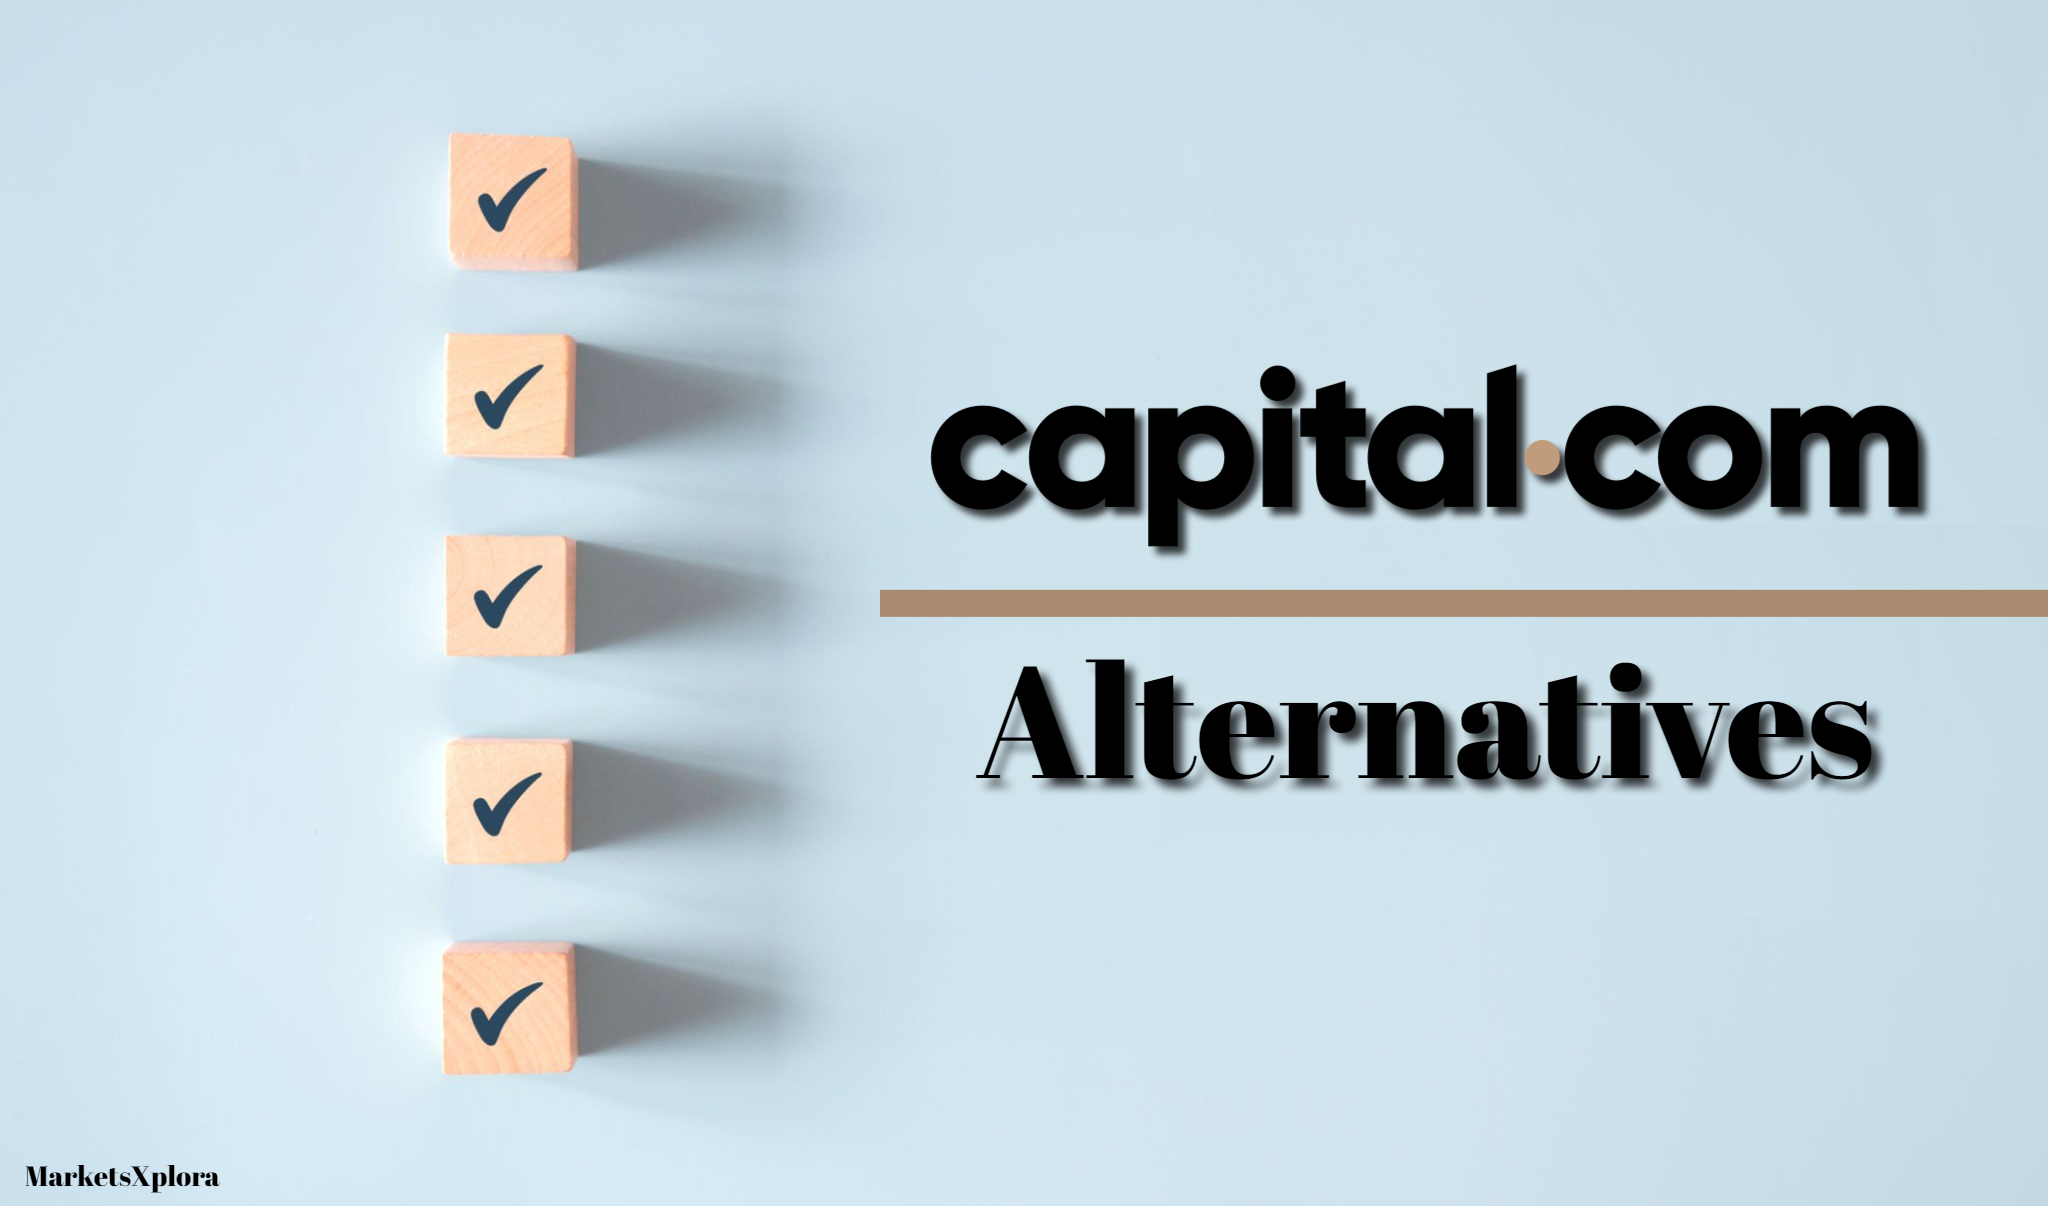 Not sure if Capital.com is right for you? Explore these Capital.com alternatives offering diverse markets, cutting-edge trading platforms, premium research and low trading costs. Find your ideal broker match.